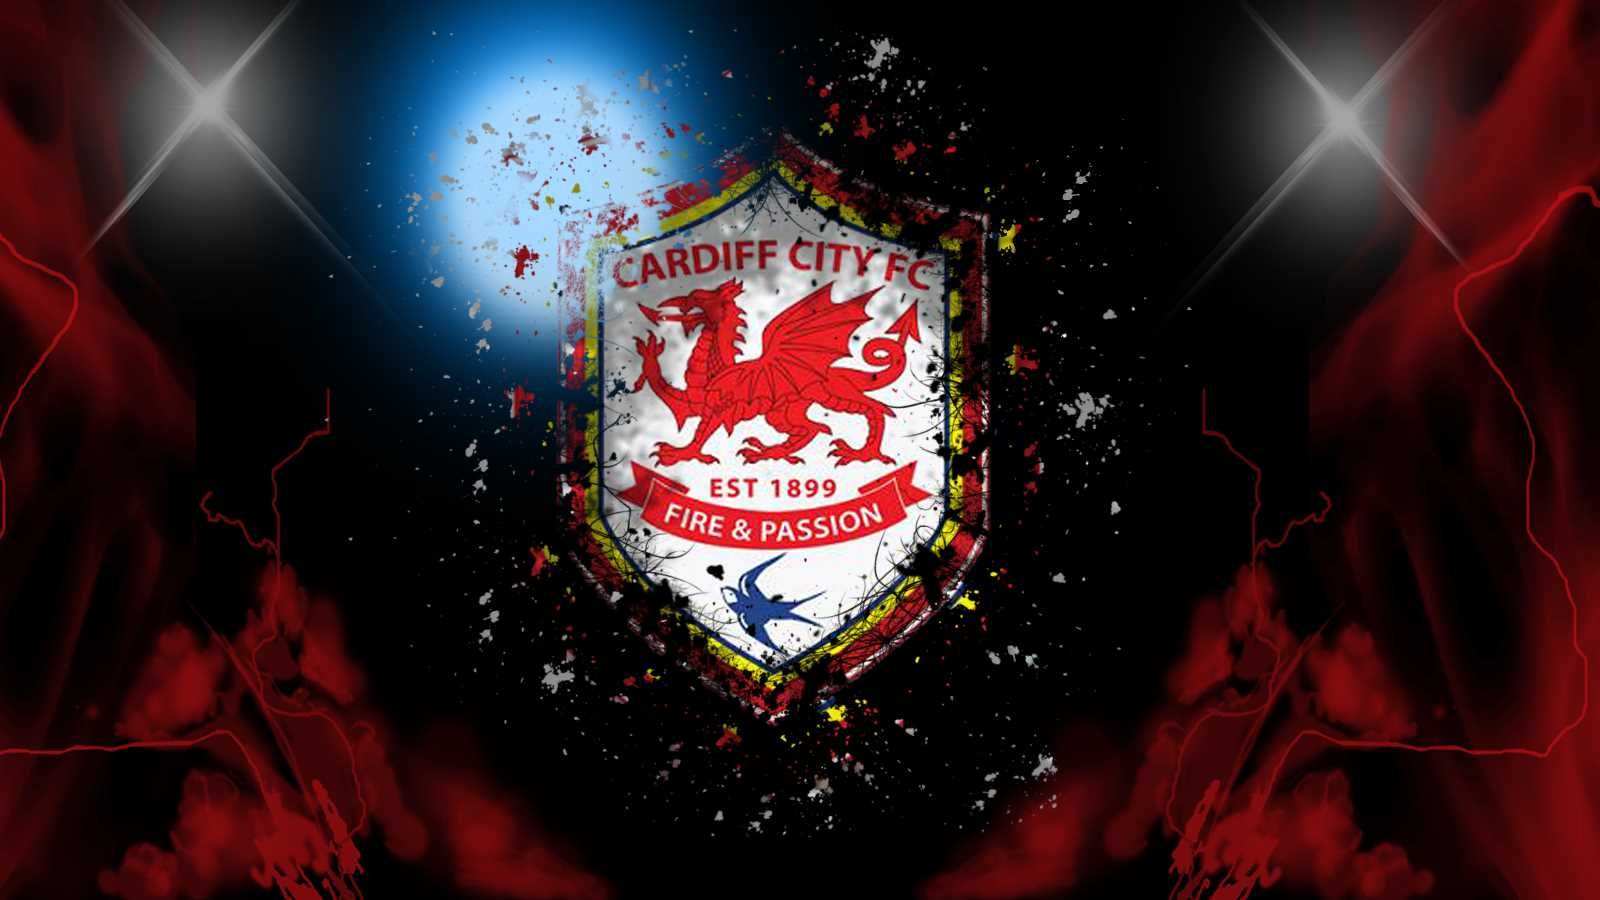 Cardiff City Fc Fire And Passion Logo Wallpaper HD